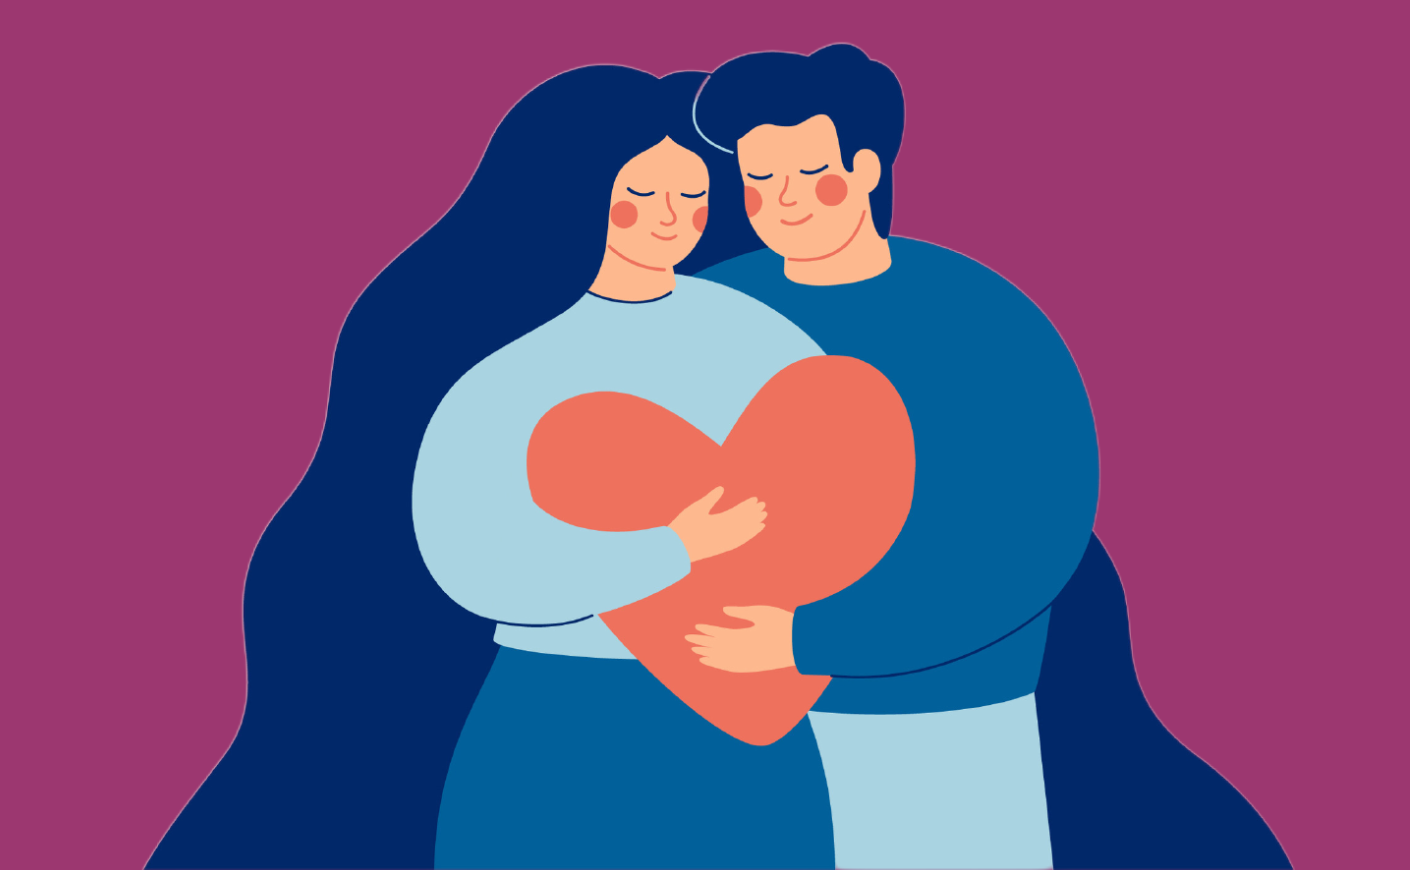 Illustration of a couple holding a heart in their arms